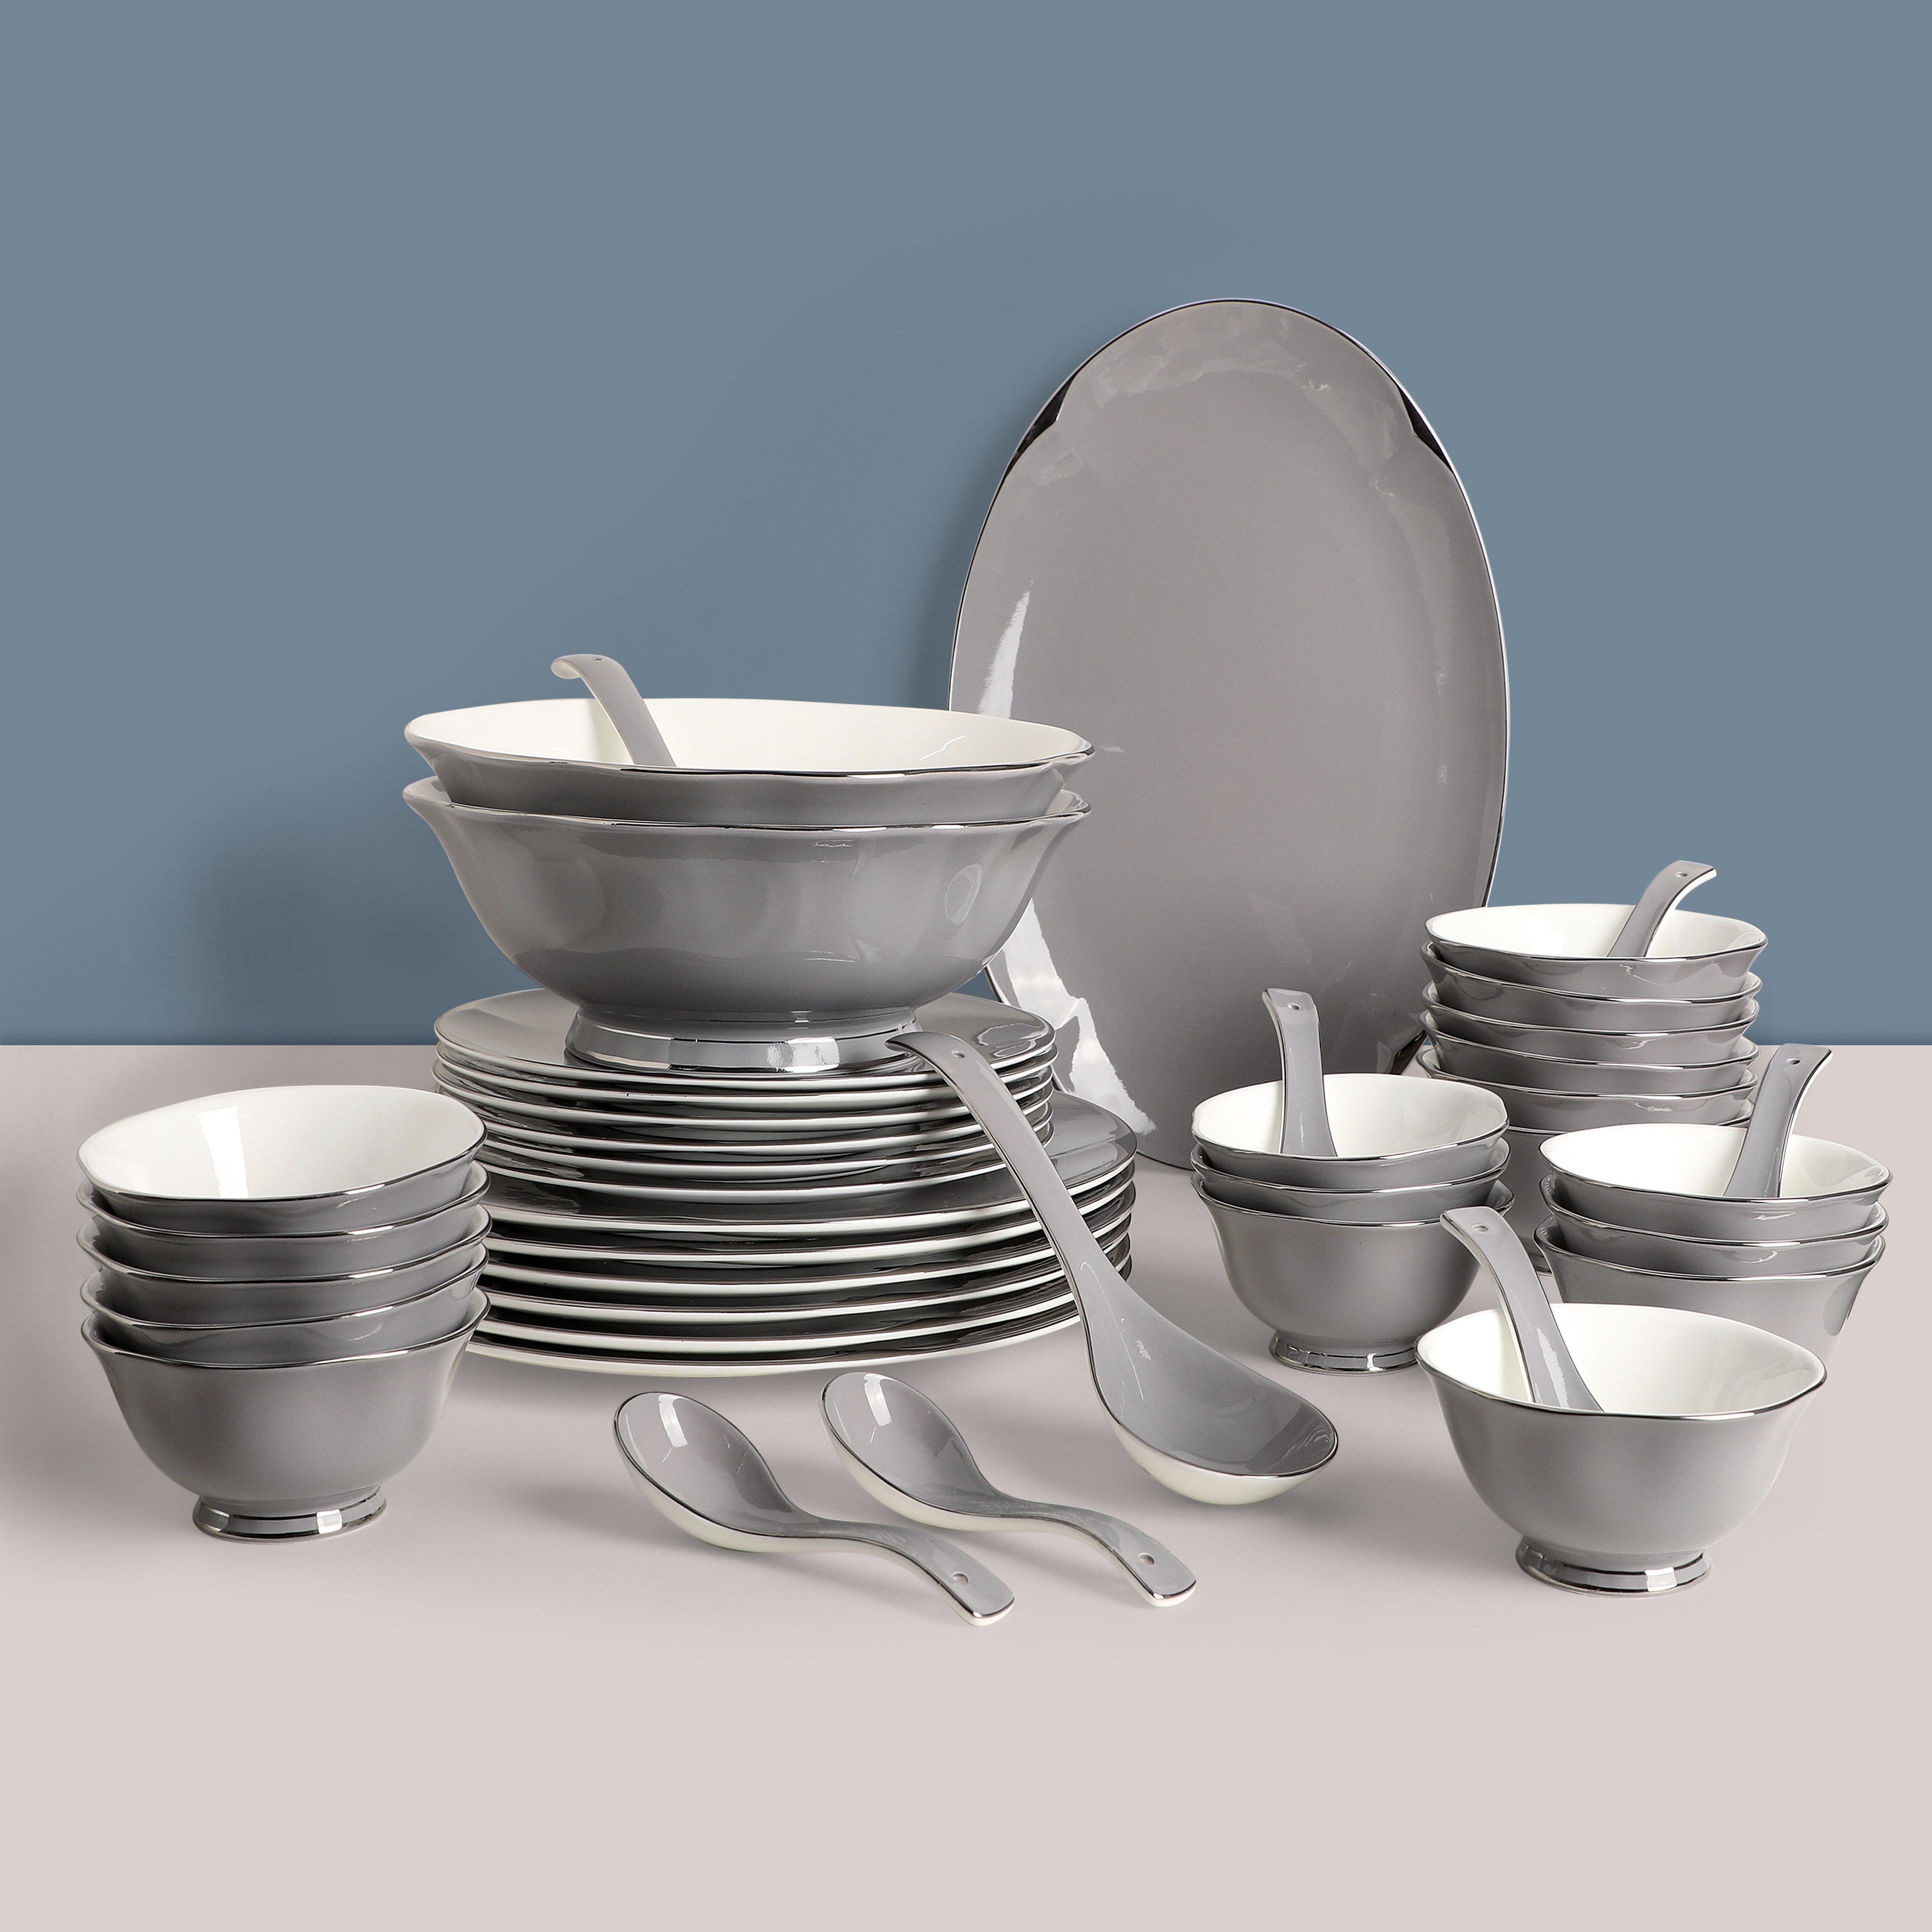 THE HOME CO. Dinner Set Of 41 Pcs - Grey Porcelain With Silver Plated